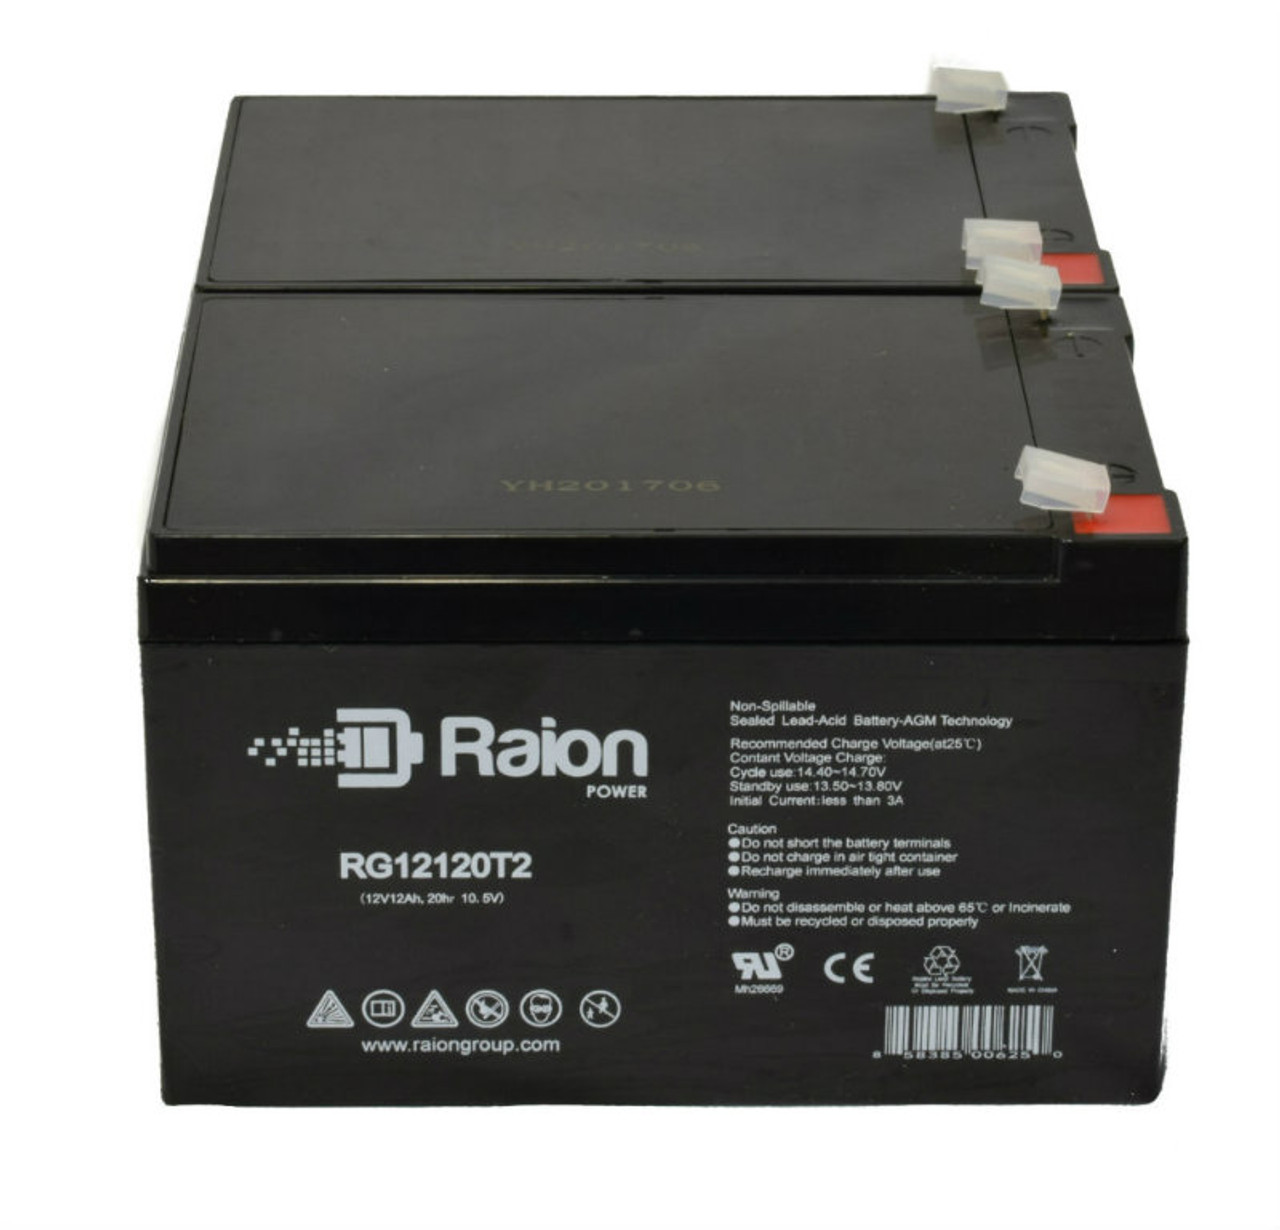 Raion Power RG12120T2 Replacement Fire Alarm Control Panel Battery for Altronix AL600ULACMCBJ - 2 Pack